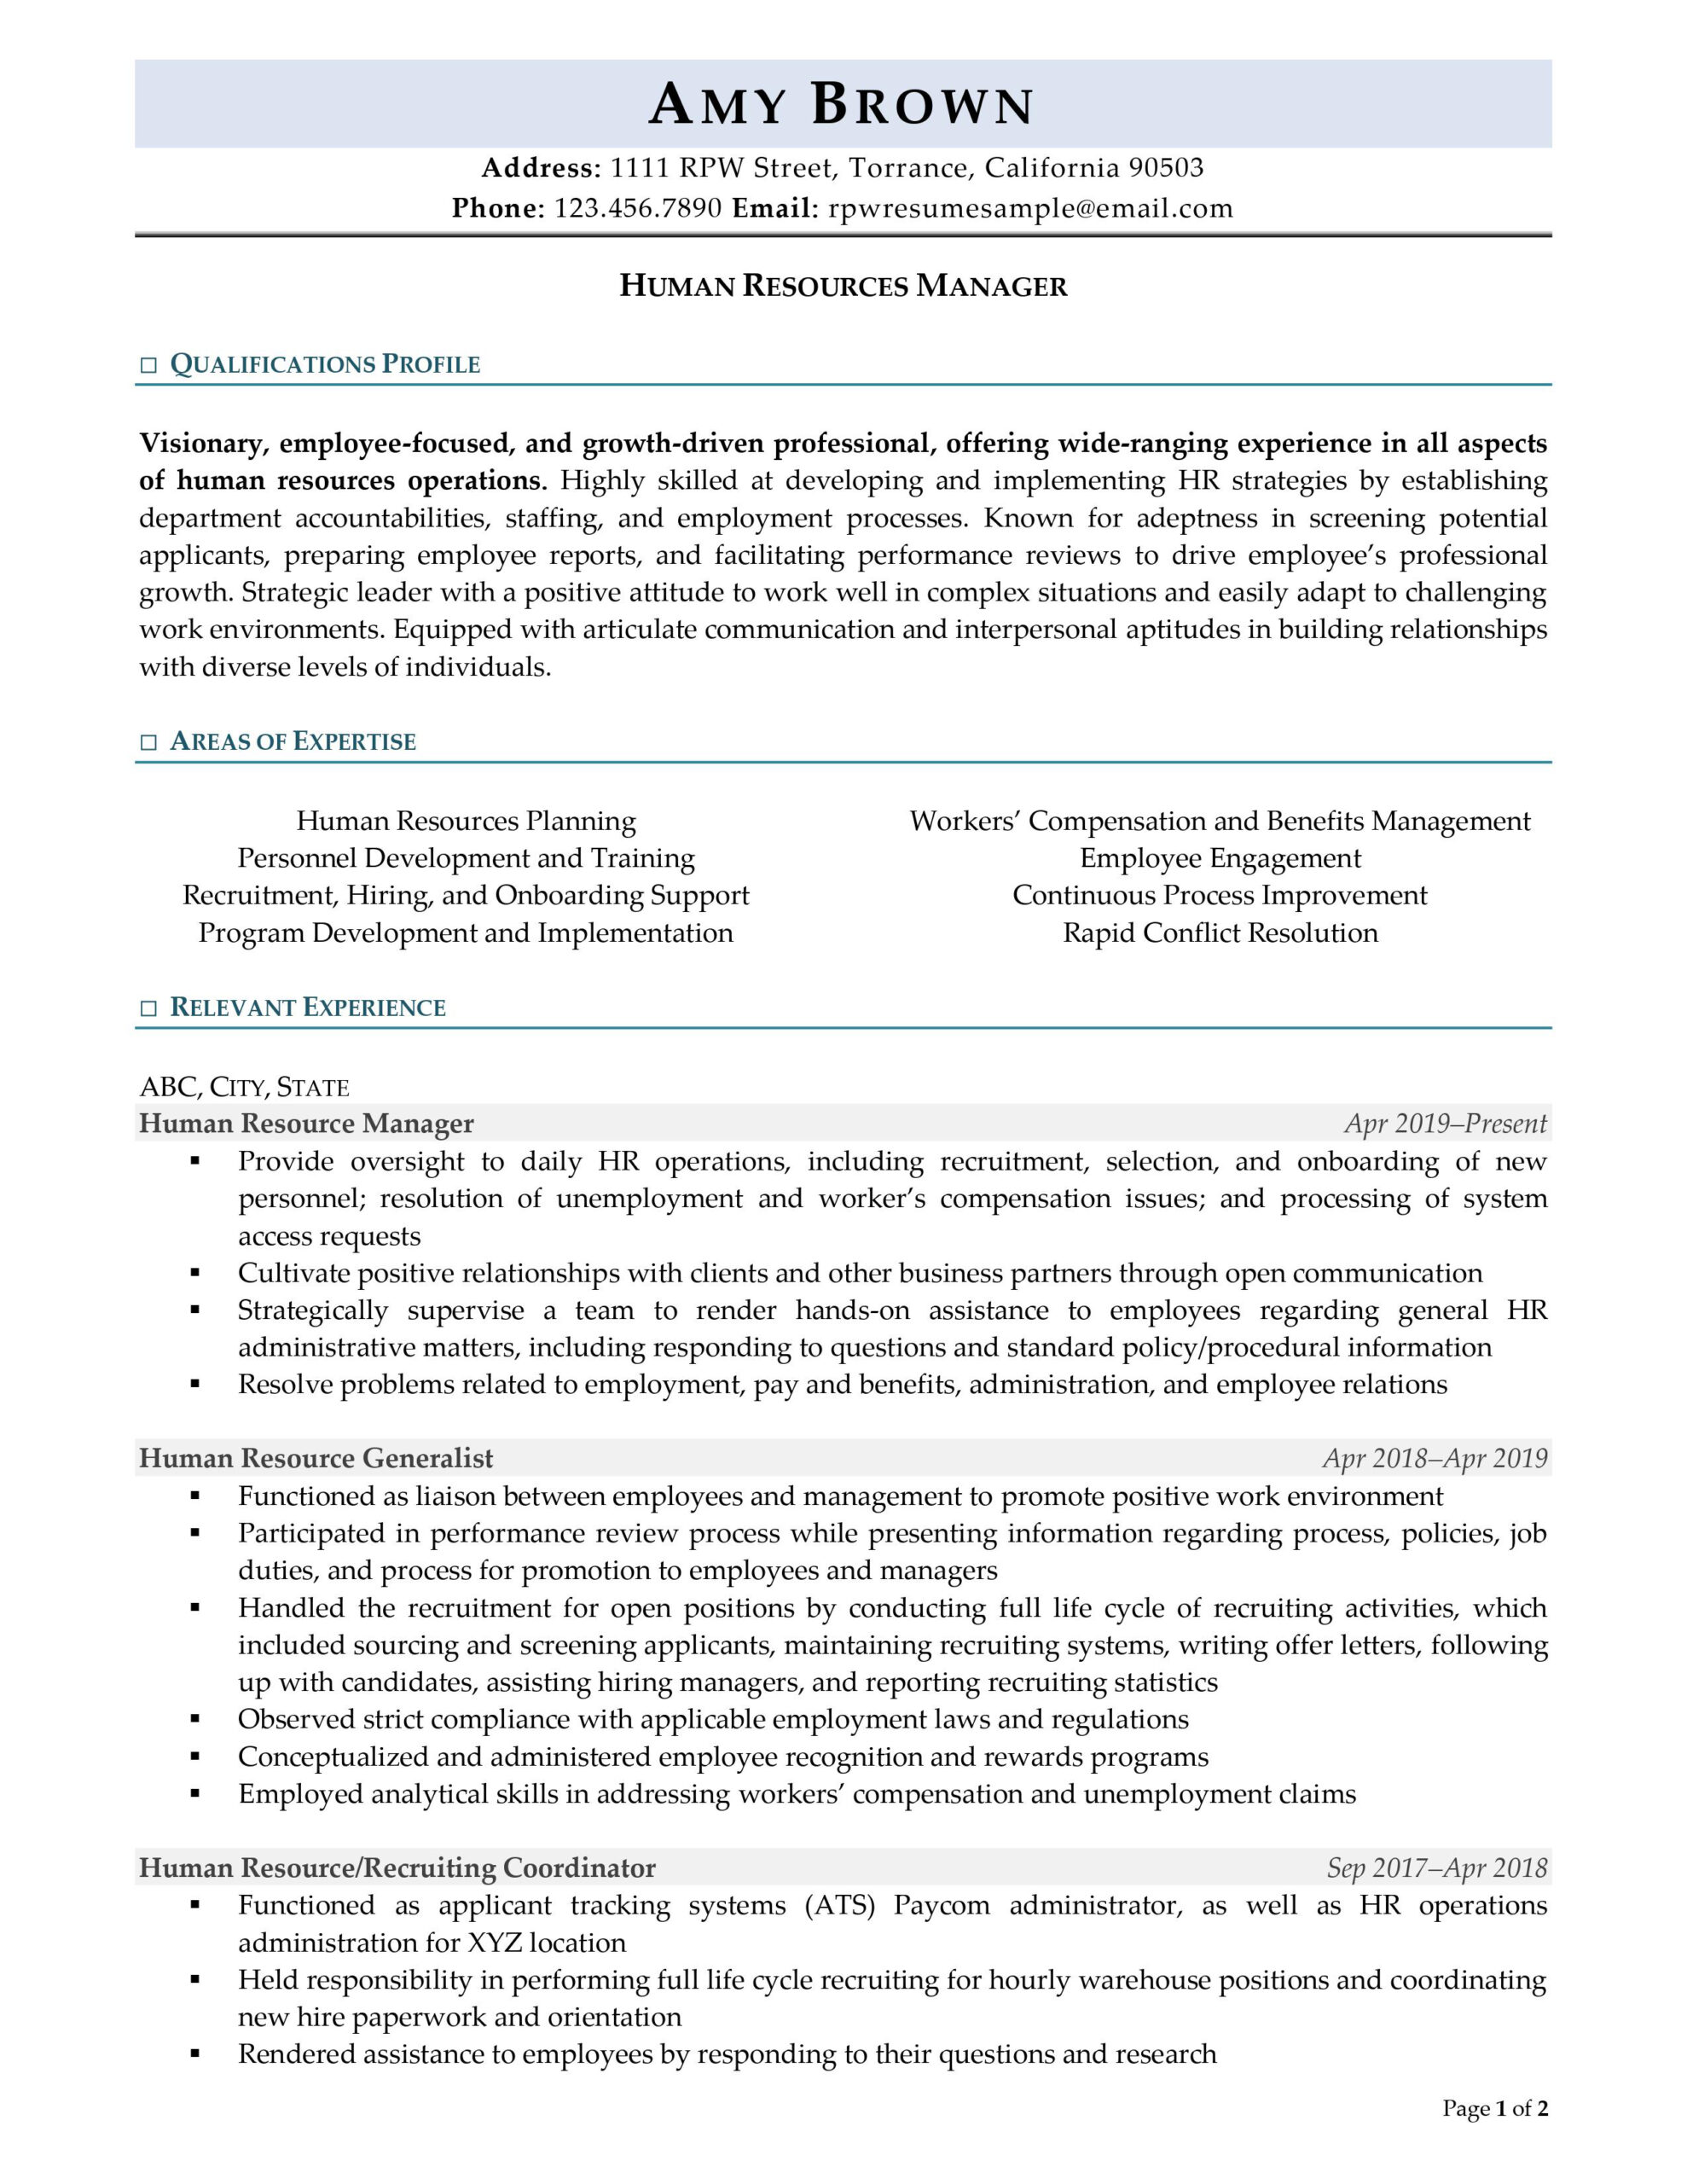 Resume Professional Writers Hr Manager Resume Example Page 1